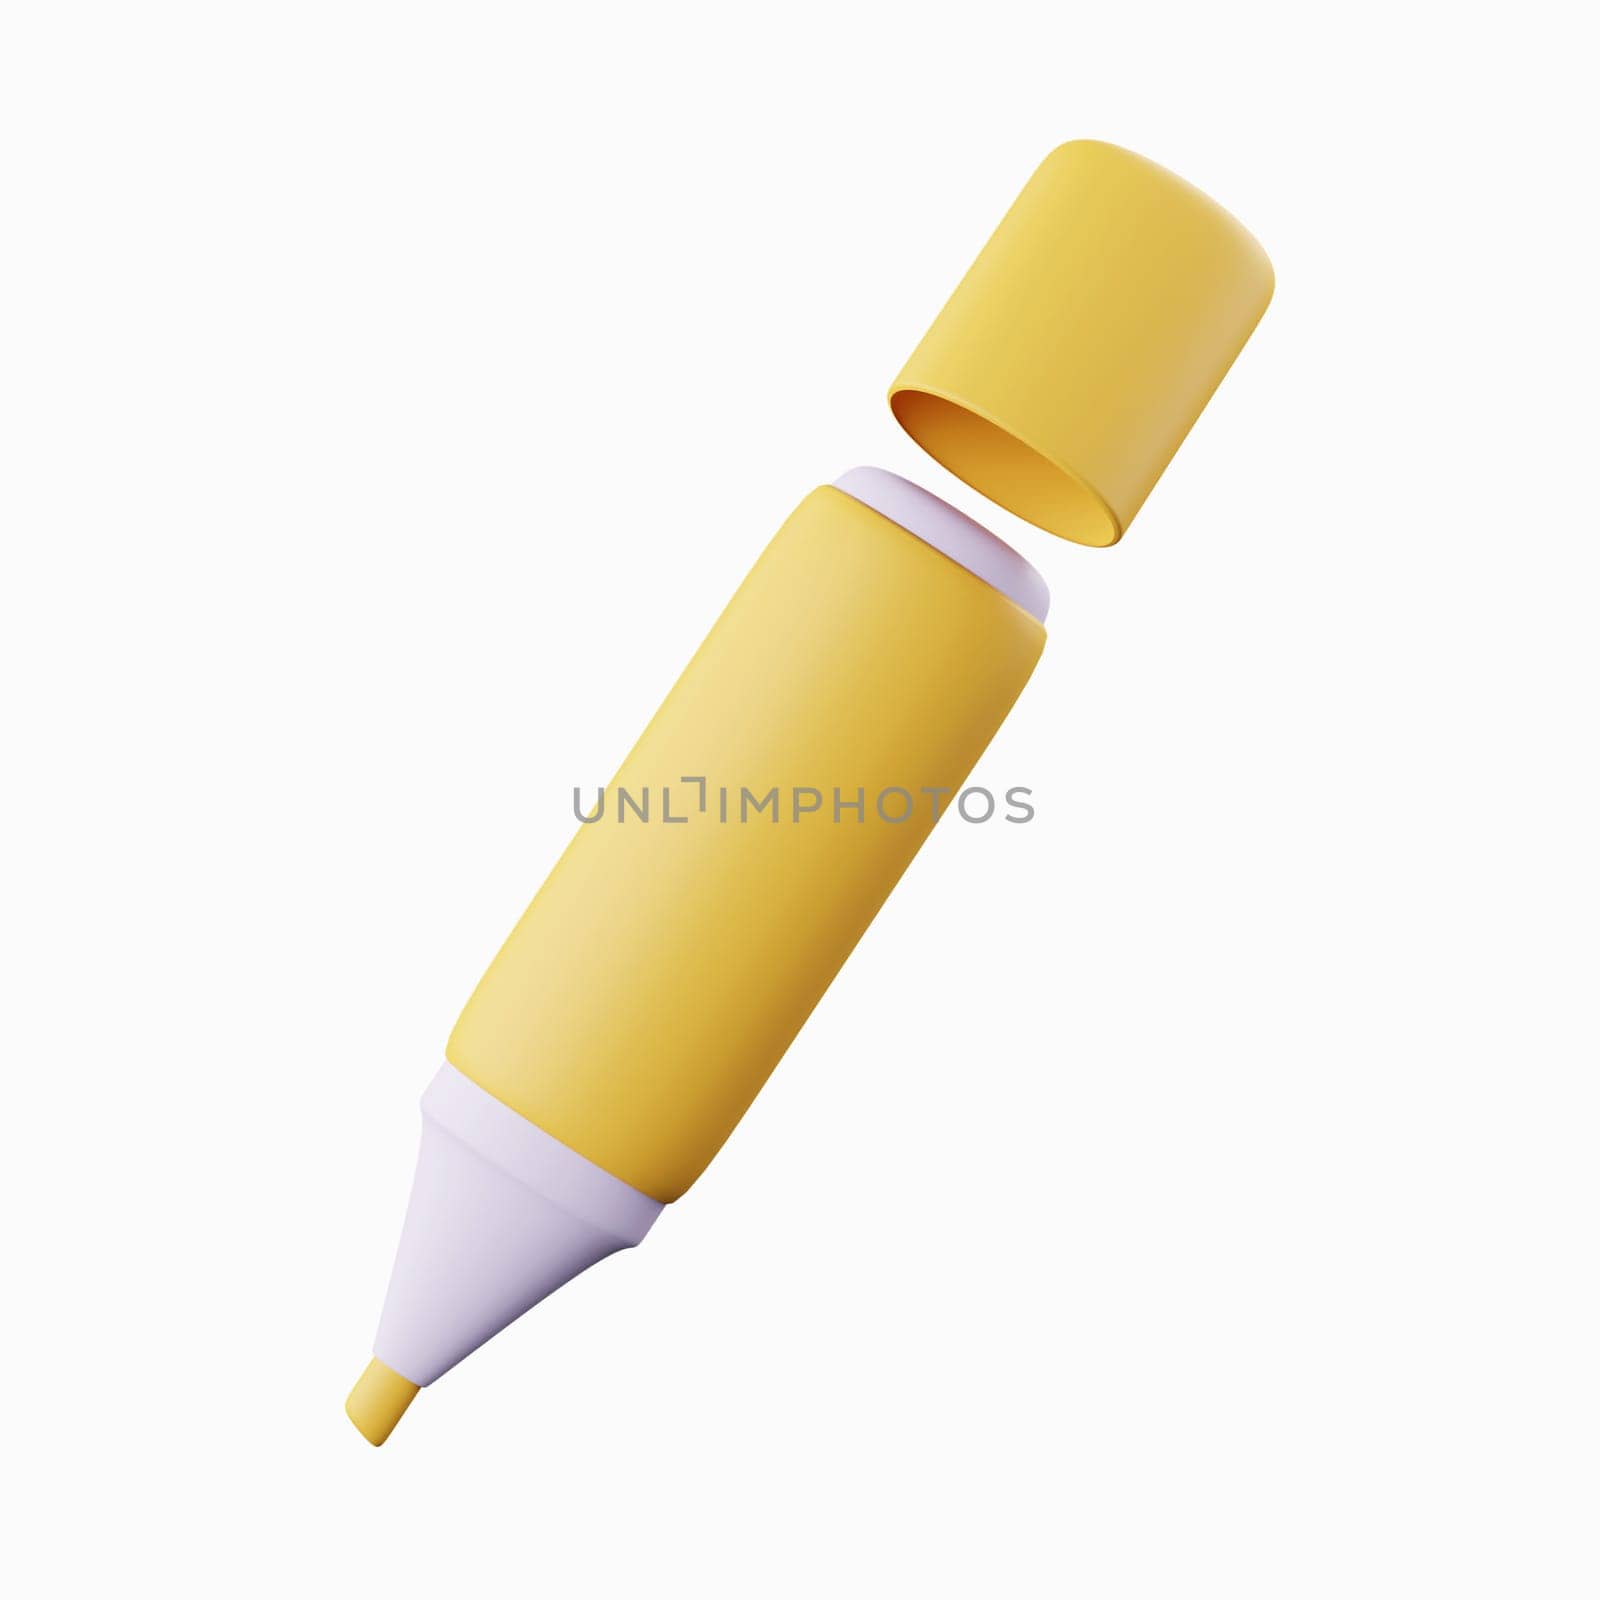 3d marker pen for education, school and work. icon isolated on background, icon symbol clipping path. 3d render illustration by meepiangraphic